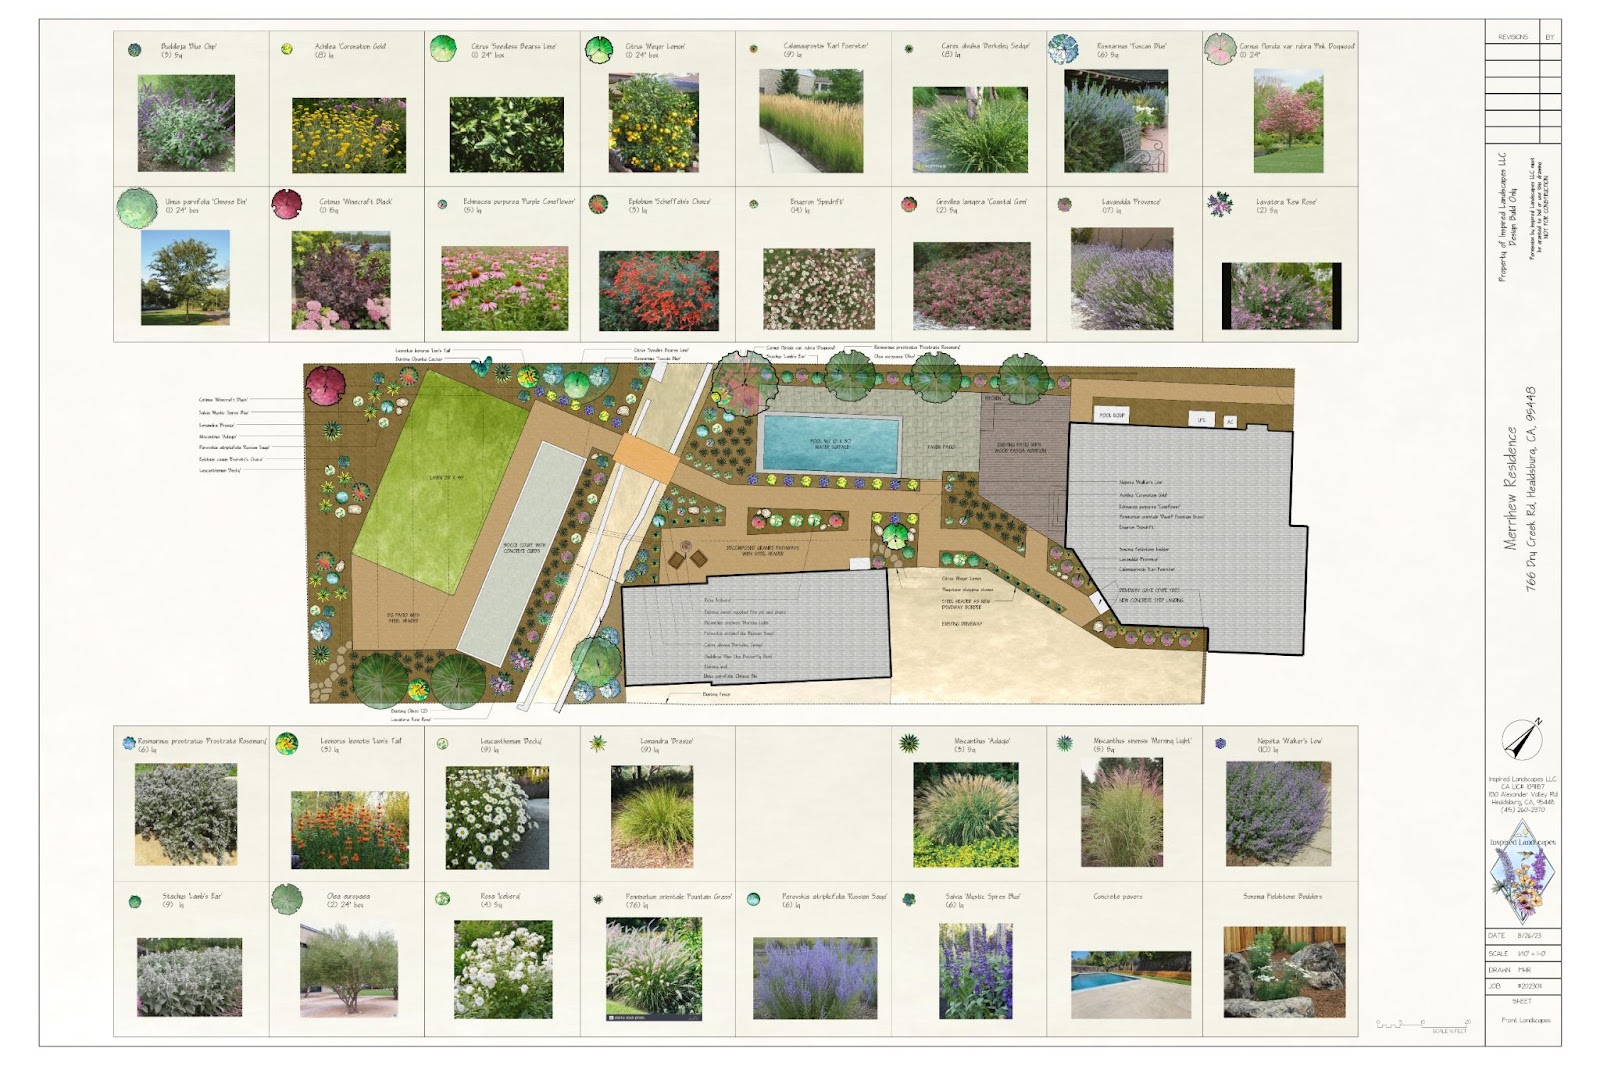 What Should I Expect From a Landscape Designer?